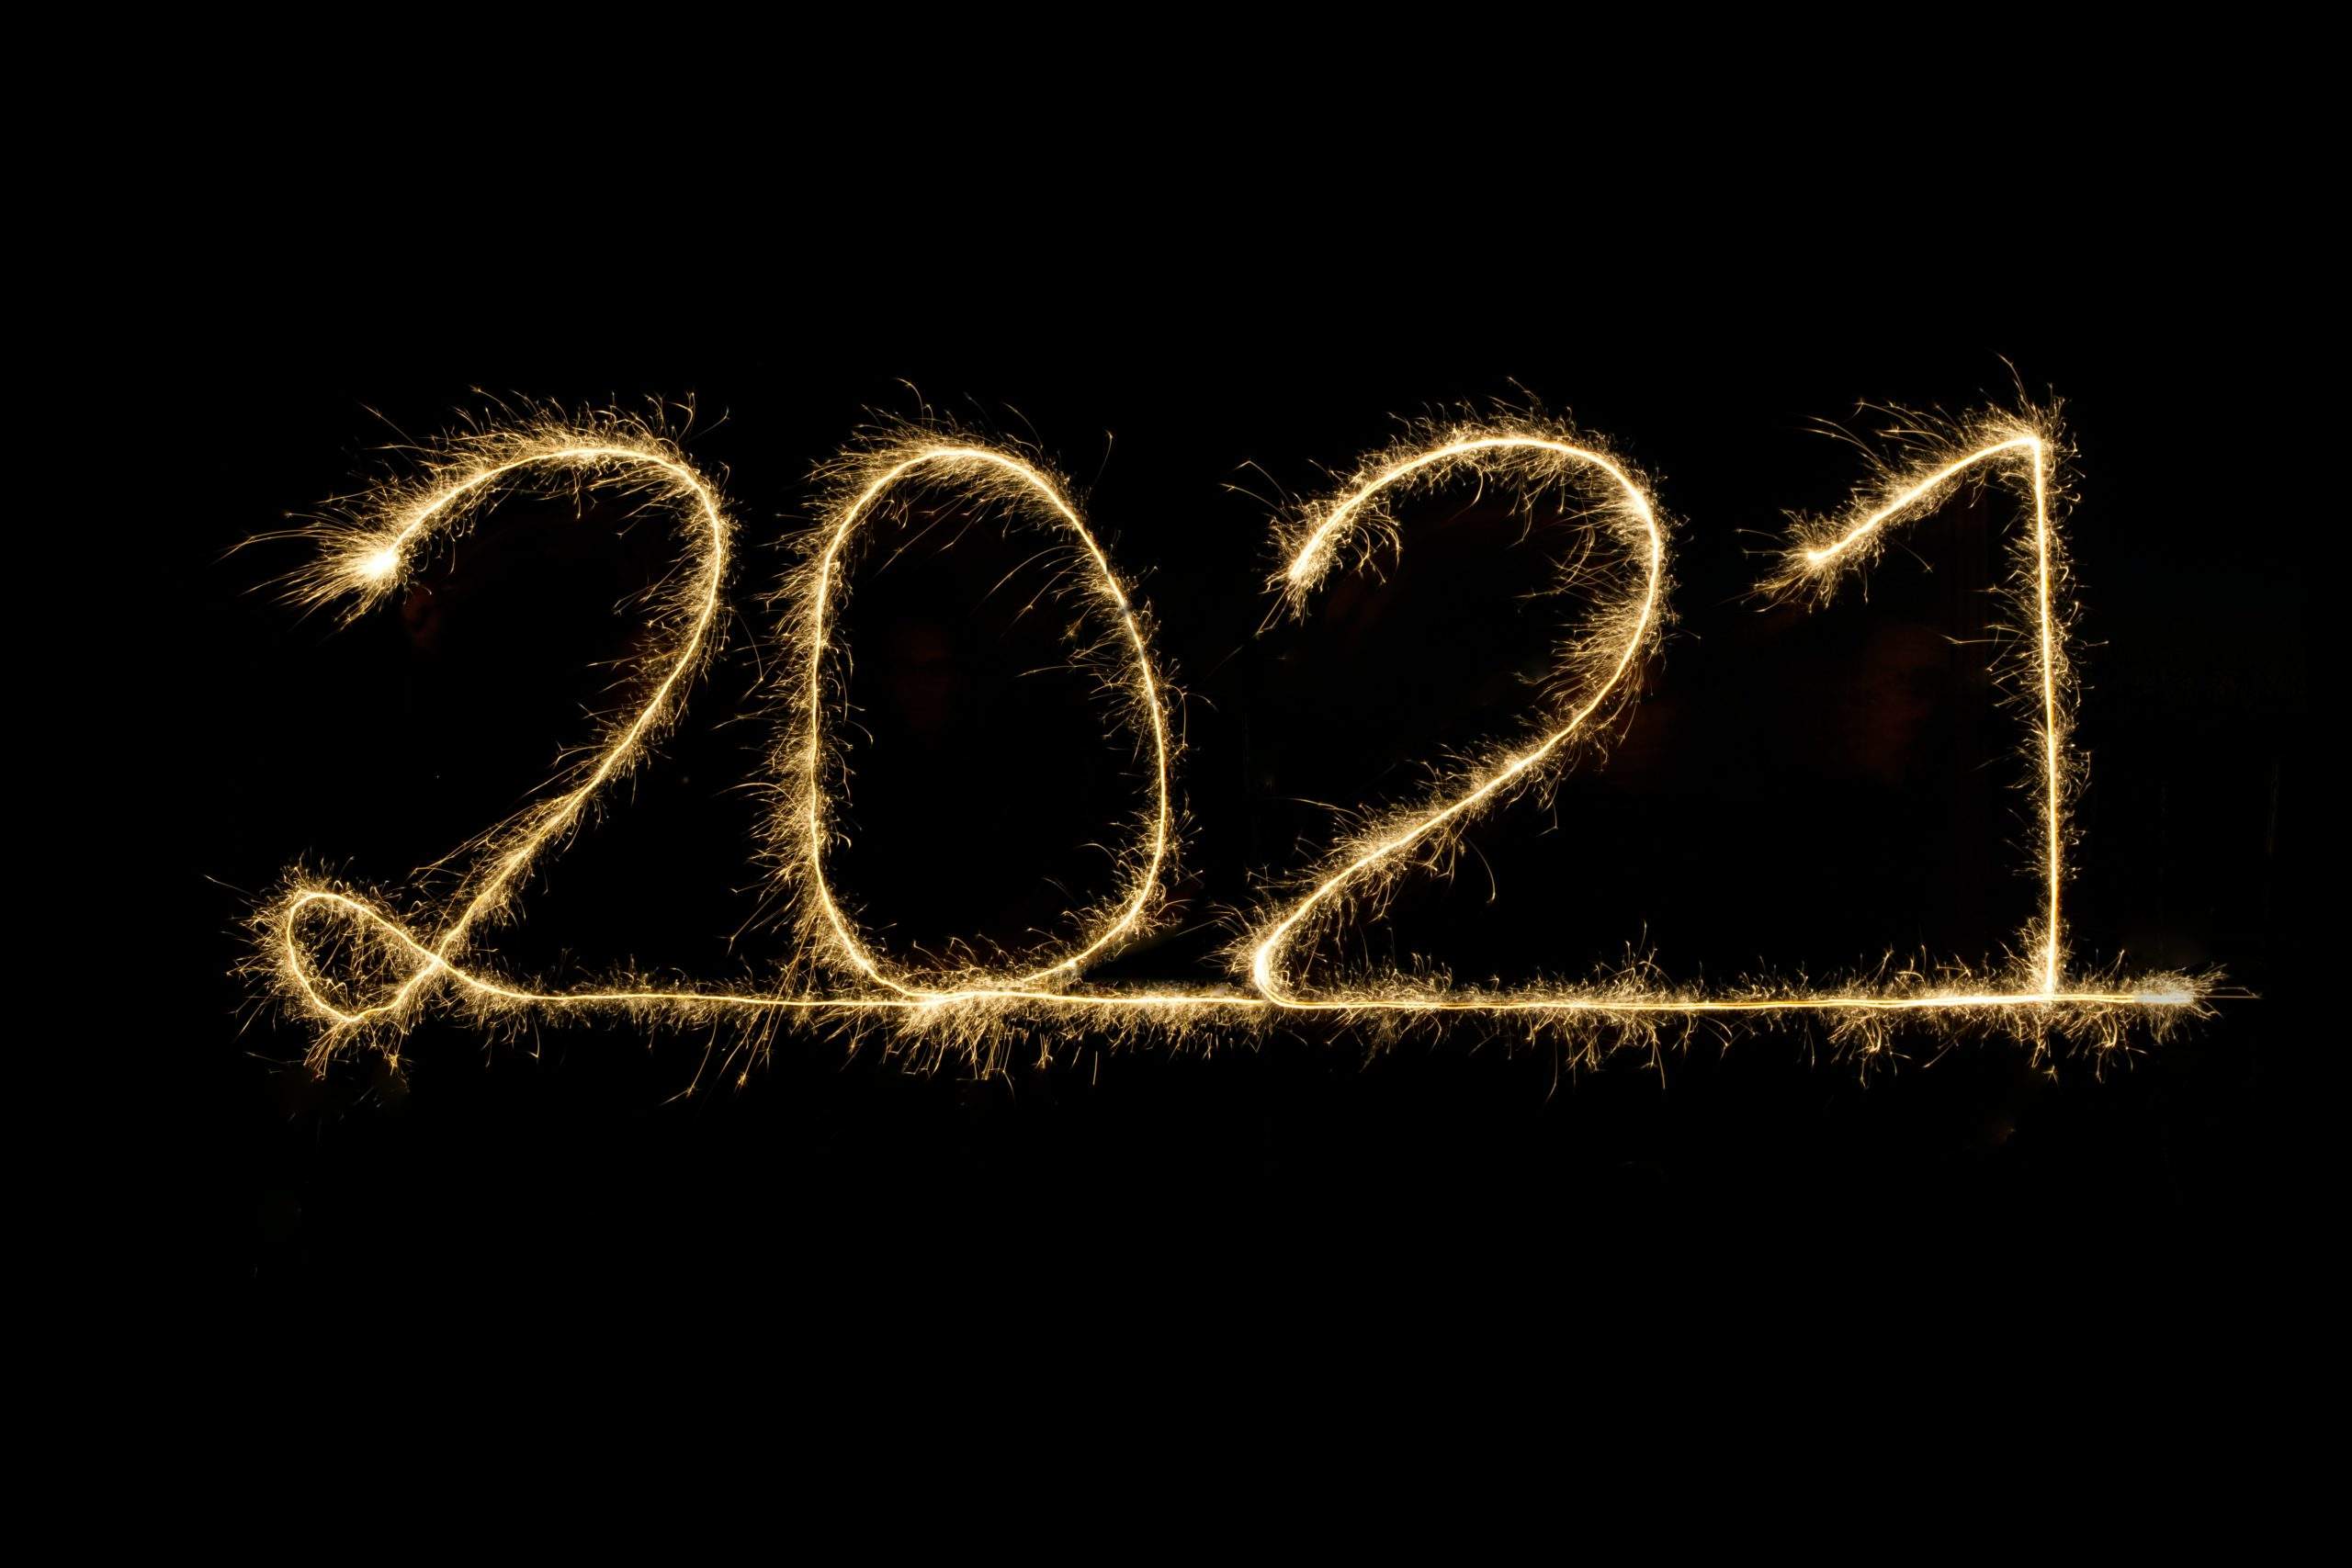 Trips to Take in 2021 Based on Your New Year’s Resolution